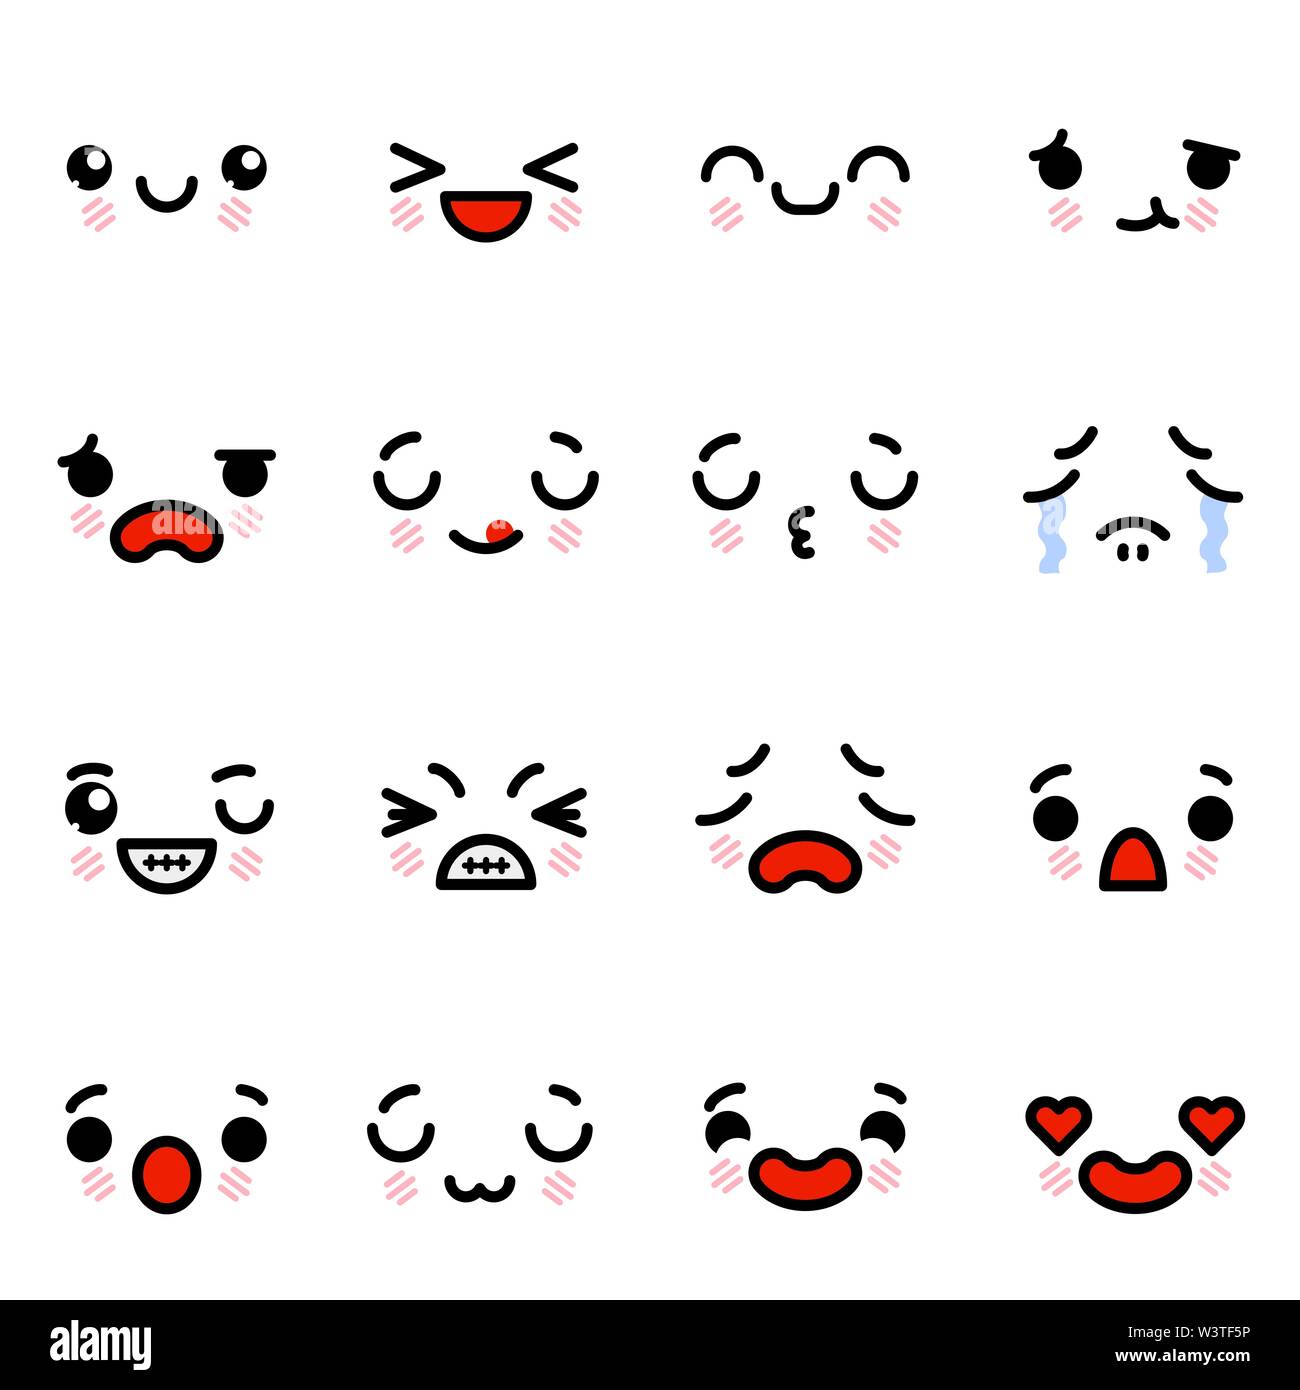 Icon set of emoji emoticons with different emotions. Vector ...